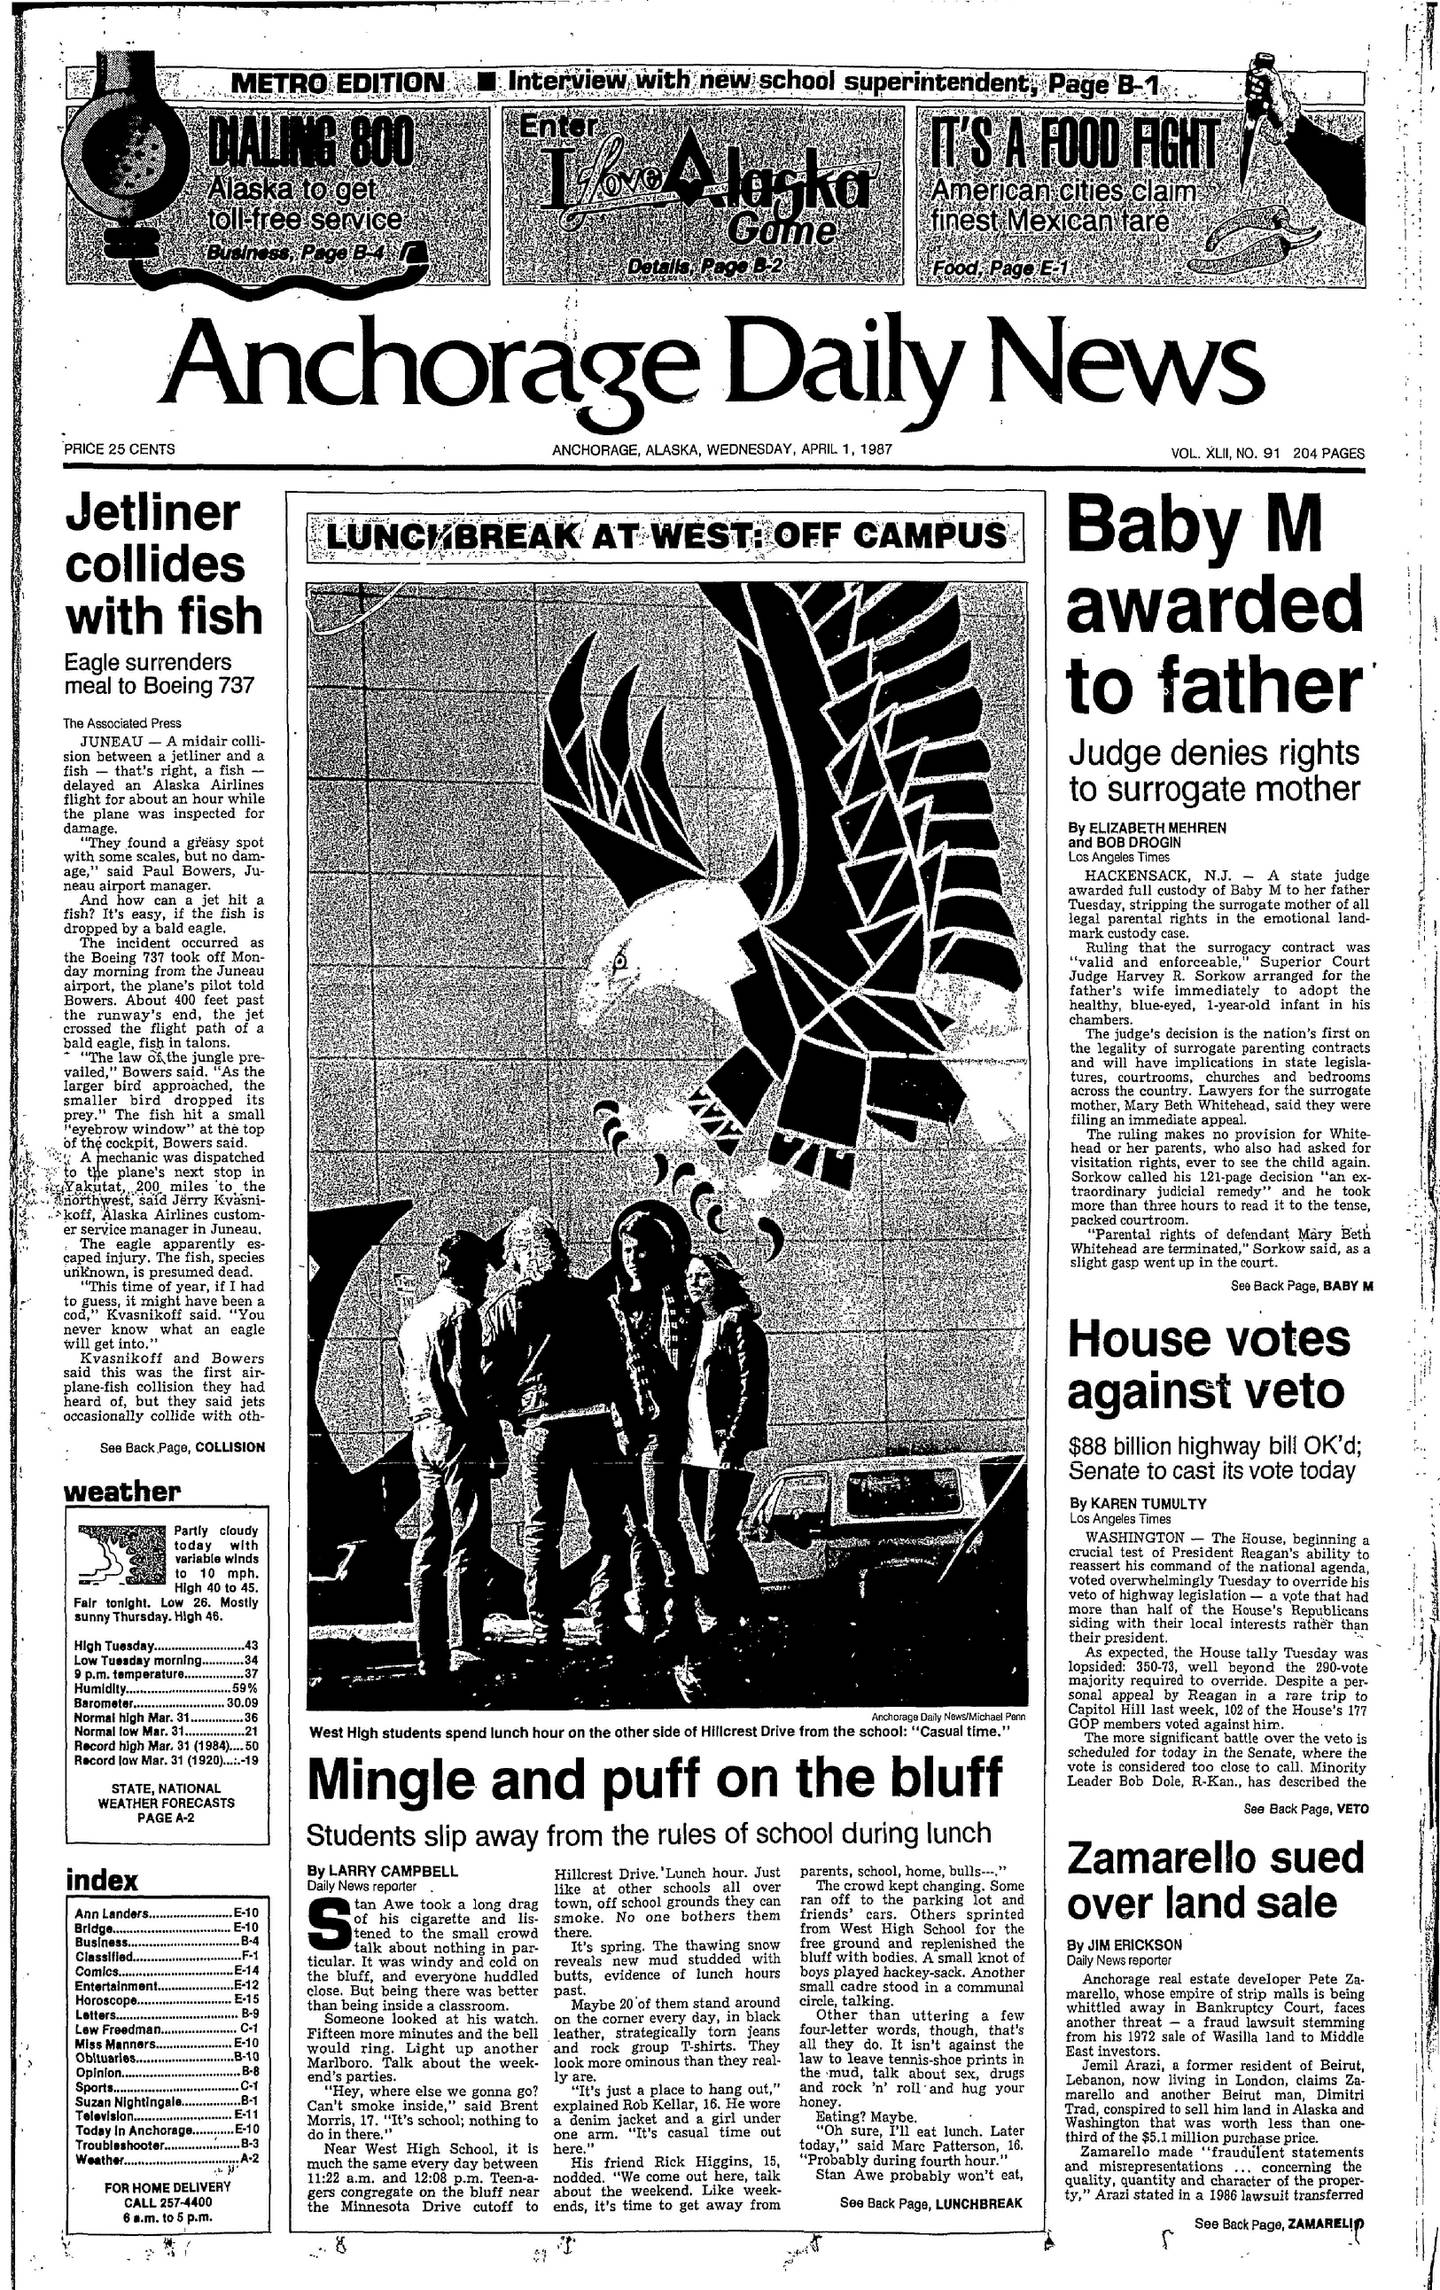 The April 1, 1987 Anchorage Daily News frontpage, featuring an article titled “Jetliner Collides with Fish.”